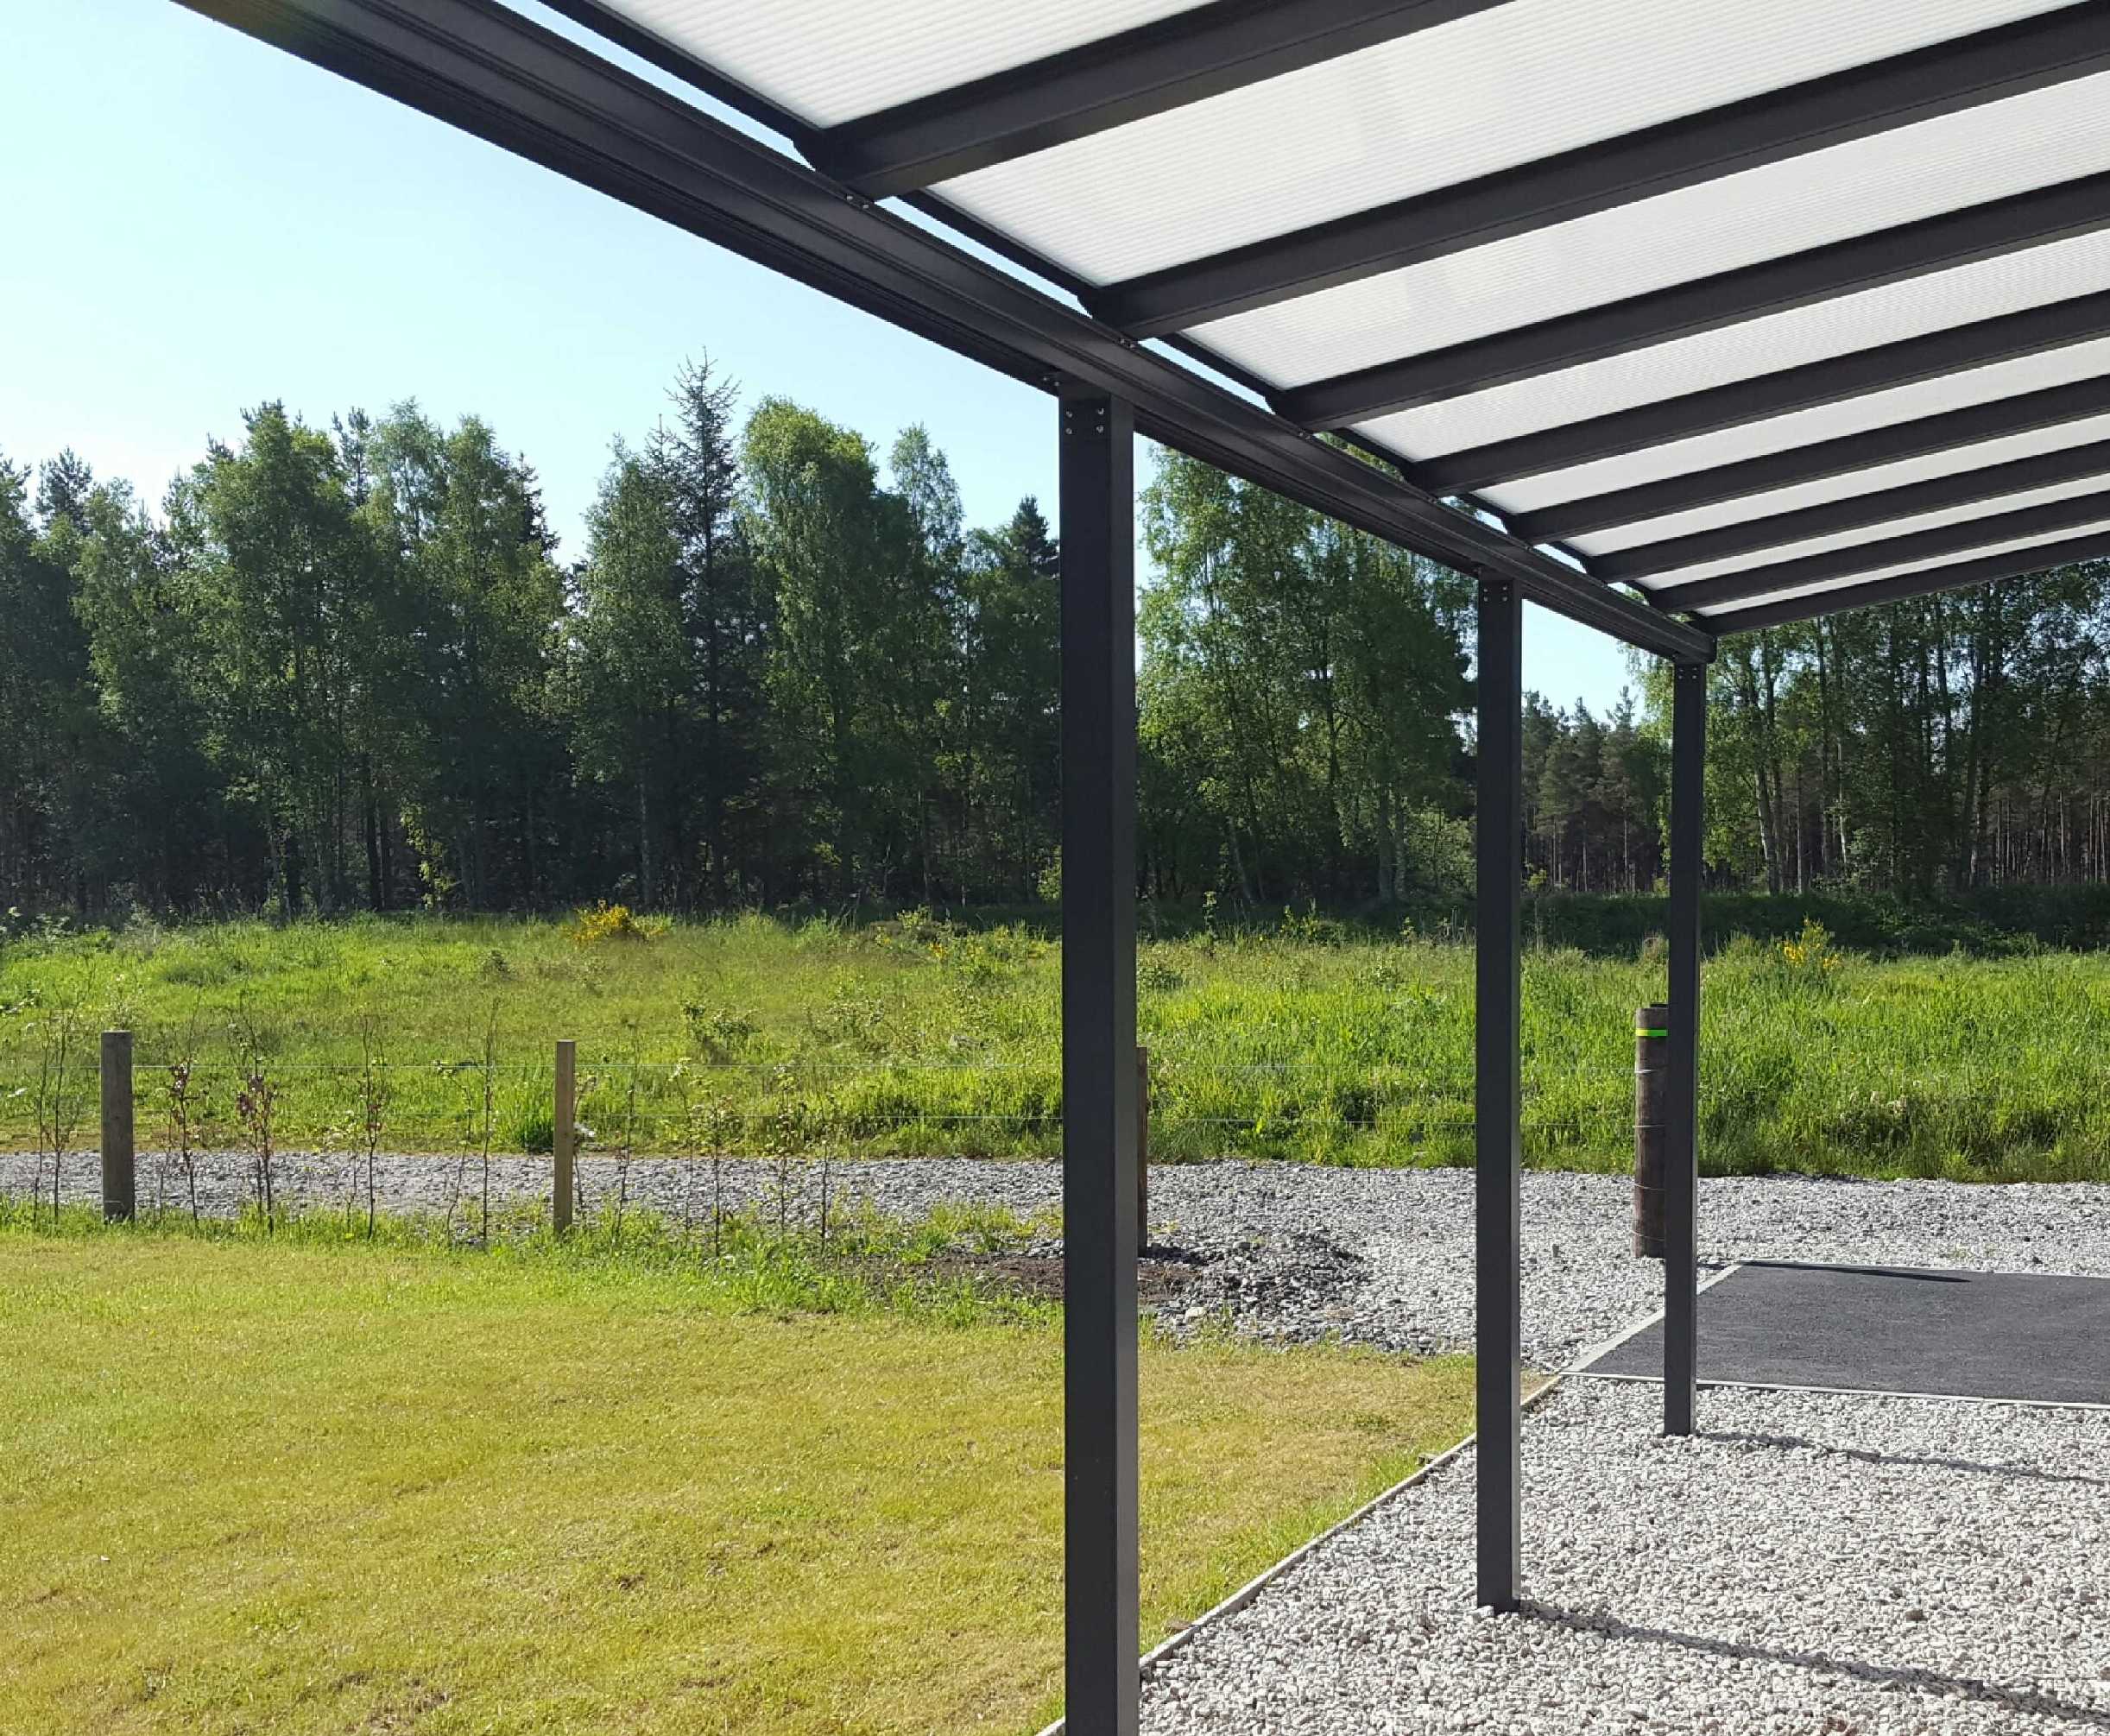 Omega Smart Lean-To Canopy, Anthracite Grey, 6mm Glass Clear Plate Polycarbonate Glazing - 8.4m (W) x 3.5m (P), (4) Supporting Posts